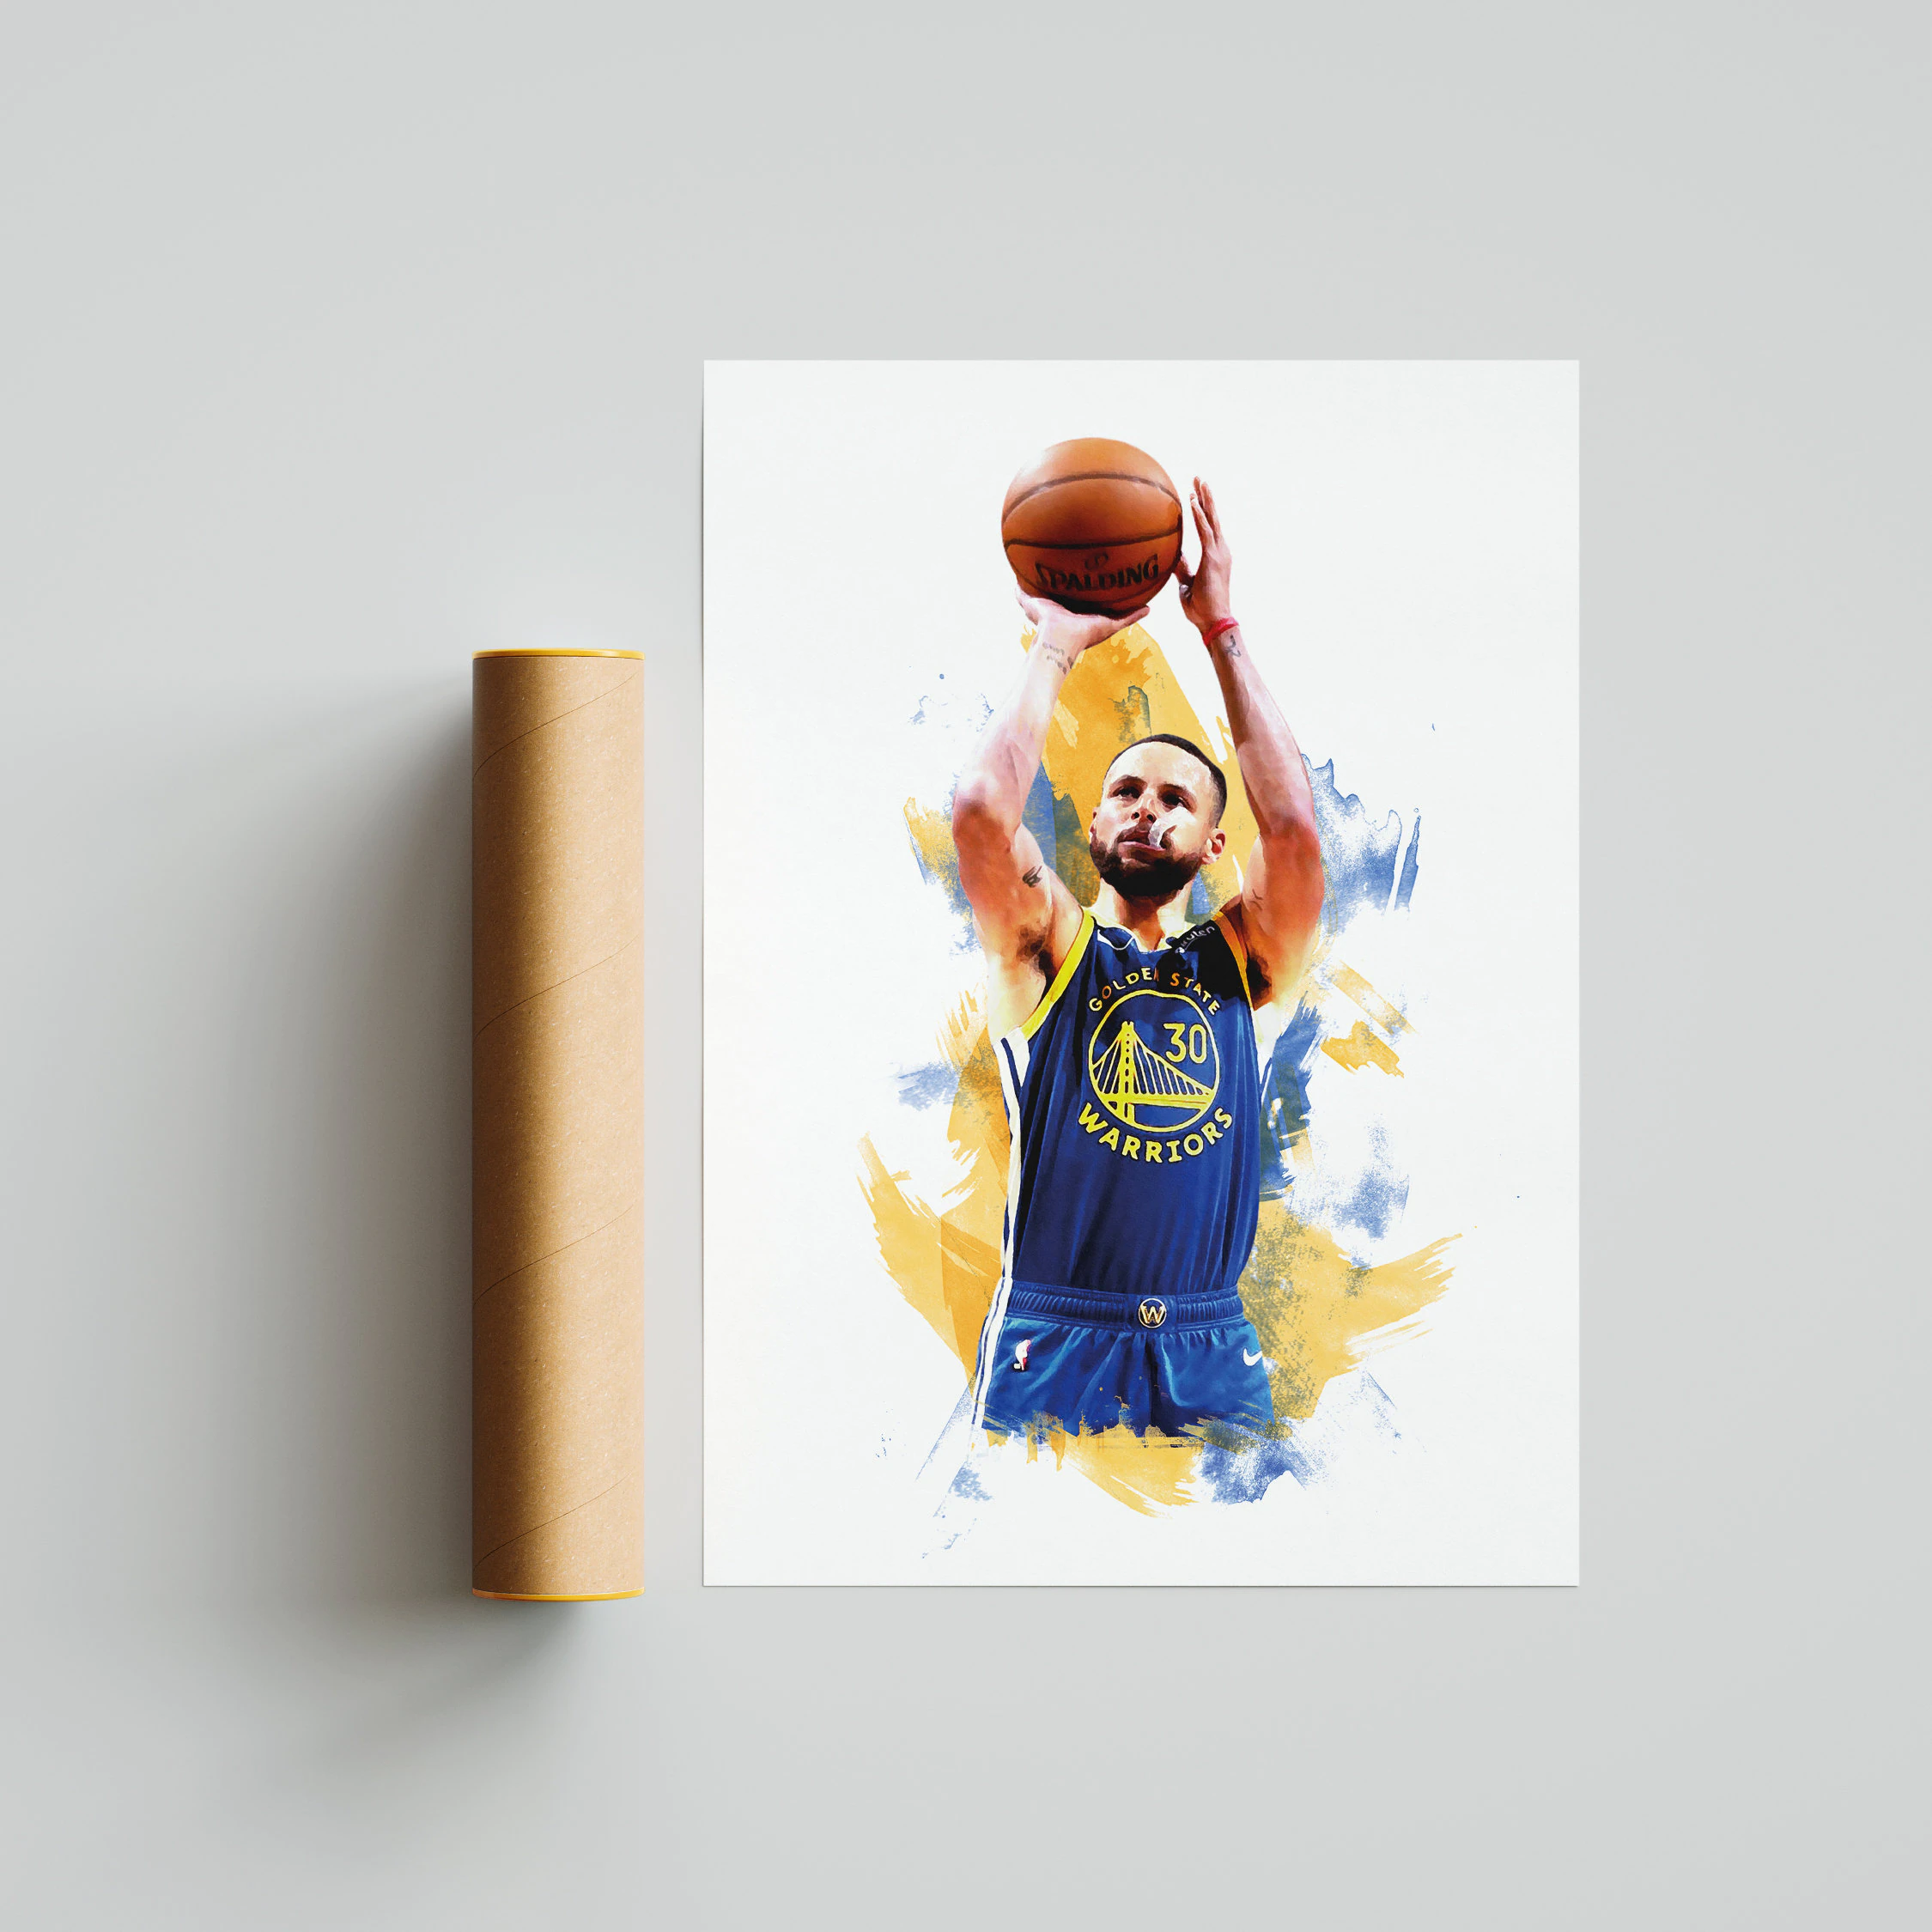 Steph Curry - Golden State Warriors - Poster - Print